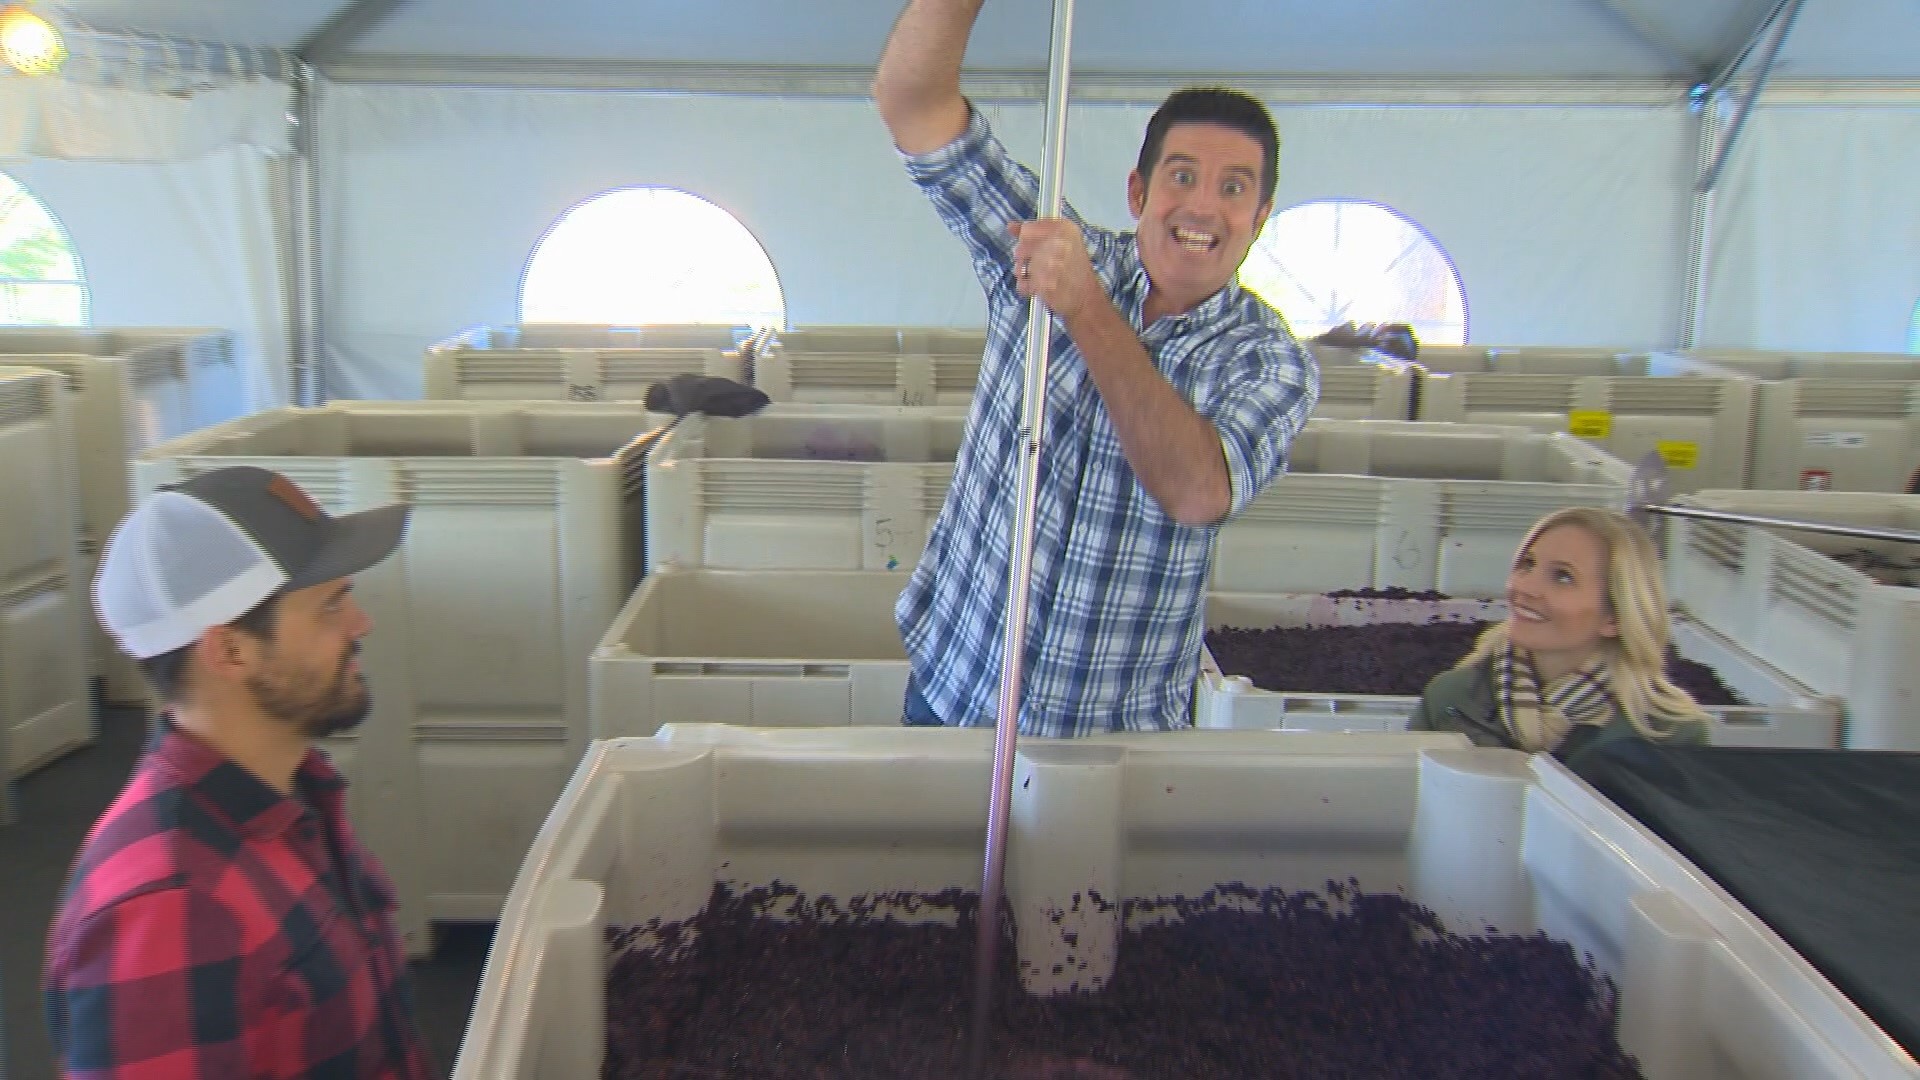 Drew Carney visits Oregon Wine Country and learns the vine to bottle wine making process.